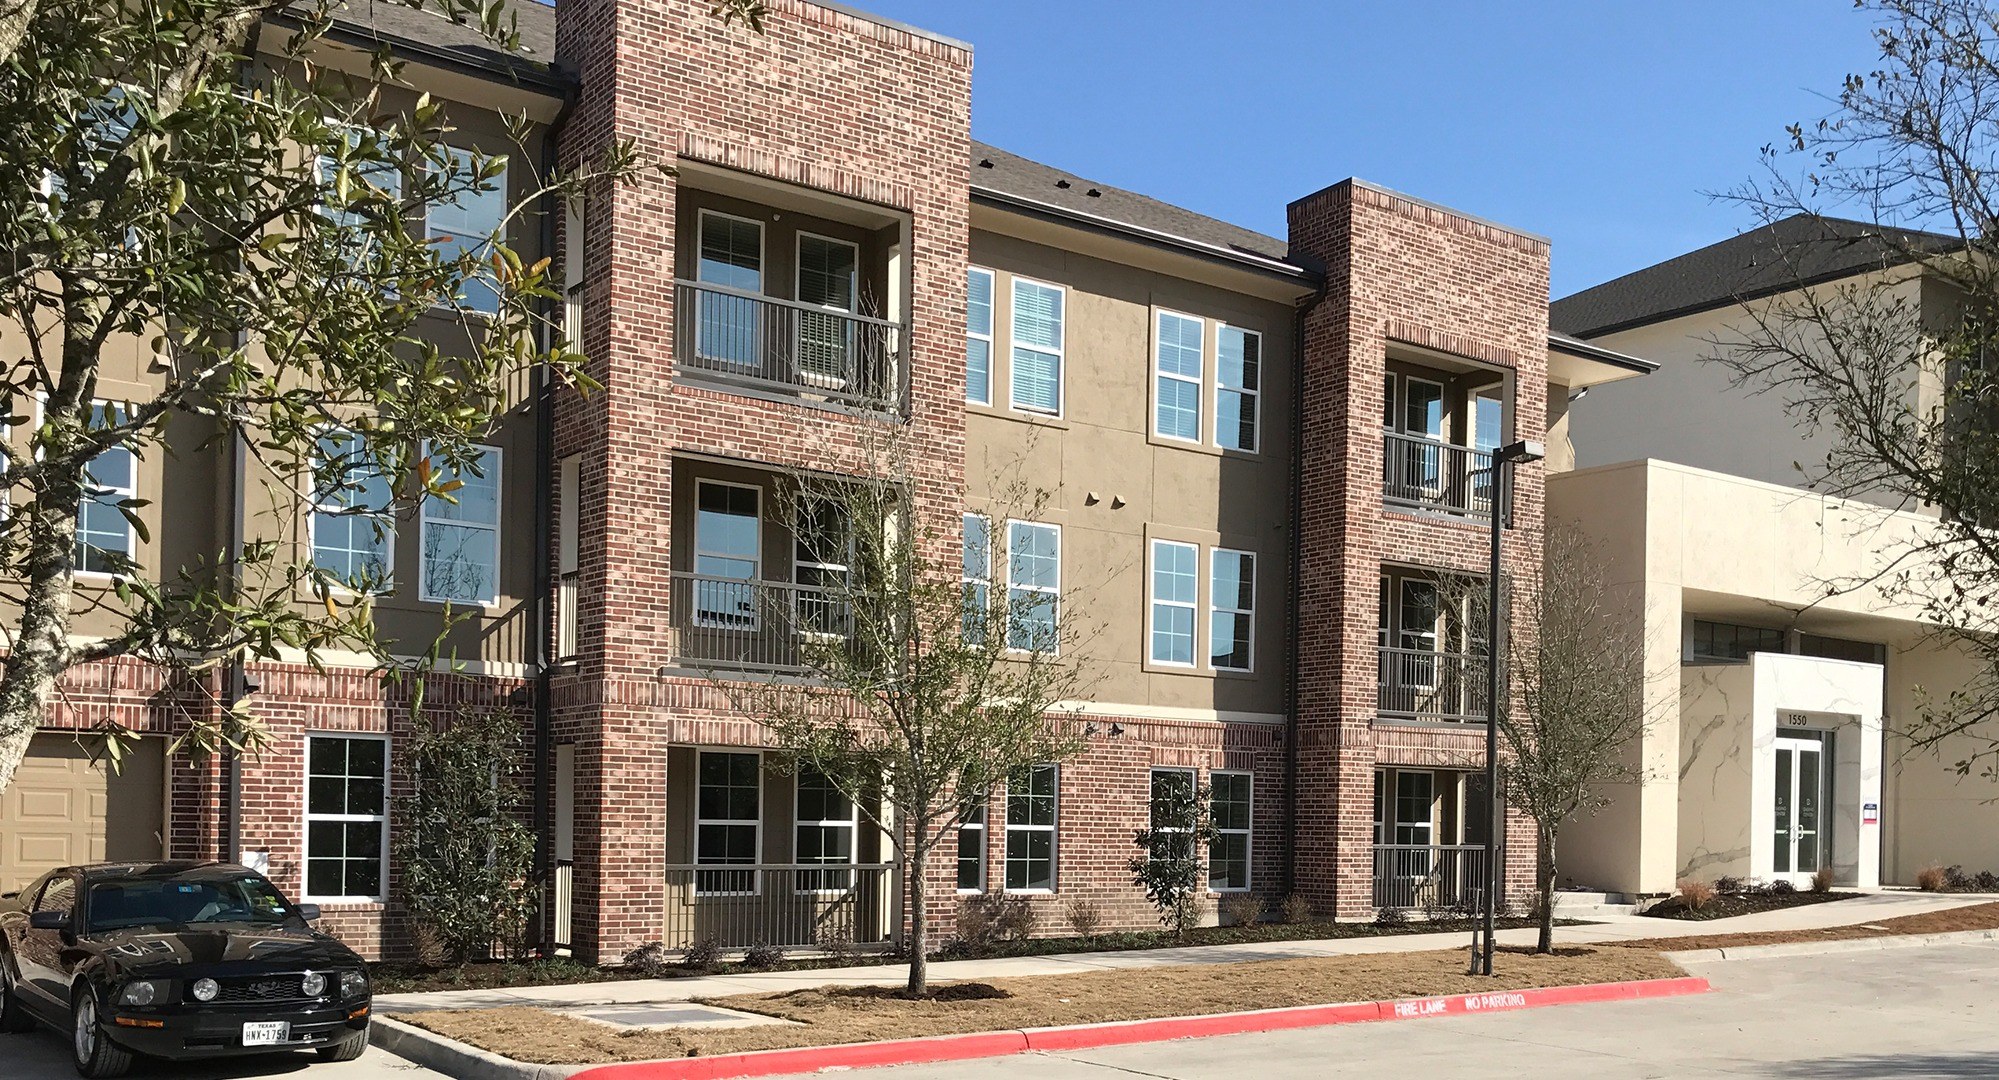 ,Apts For Rent In Plano Tx ,apartment for rent in plano tx 75024 ,apartment for rent in plano tx 75074 ,apartment for rent in plano tx 75075 ,apartment for rent in plano tx-75093 ,apartments for rent in plano tx 75023 ,apartments for rent in plano tx 75025 ,apartments for rent in plano tx all bills paid ,apartments for rent in plano tx with bad credit ,studio apartment for rent in plano tx ,cheap apartment for rent in plano tx ,apartment townhomes for rent in plano tx ,apartment homes for rent in plano tx ,furnished apartments for rent in plano tx ,luxury apartments for rent in plano tx ,best apartments for rent in plano tx ,new apartments for rent in plano tx ,senior apartments for rent in plano tx ,affordable apartments for rent in plano tx ,1 bedroom apartment for rent in plano tx ,apartment buildings for sale in plano tx ,apartments in plano tx cheap ,apartment complex for sale in plano tx ,apartments for rent in plano dallas tx ,duplex apartments for rent in plano tx ,furnished apartment for rent in plano texas ,garage apartments for rent in plano texas ,apartments in plano tx no credit check ,apartments in plano tx near legacy ,apartments in plano tx near collin college ,apartments in plano tx near george bush ,new apartment for sale in plano tx ,apartments in plano tx on legacy dr ,apartments in plano tx on ohio drive ,apartments in plano tx on independence ,apartments in plano tx on coit rd ,apartments in plano tx ohio dr ,apartments in plano tx on spring creek ,apartments in plano tx on preston rd ,apartments in plano tx section 8 ,studio apartments for rent in plano texas ,apartments in plano tx that accept section 8 ,apartment to rent in plano tx ,apartments in plano tx under $700 ,apartments in plano tx under 600 ,apartments in plano tx under 800 ,apartments in plano tx under 900 ,apartments in plano tx under 1000 ,apartments in plano tx under 500 ,apartments in plano tx under ,apartment for rent in west plano tx ,apartments in plano tx with attached garages ,apartments in plano tx with garages ,apartments in plano tx with yards ,apartments in plano tx with utilities included ,house for rent in plano tx 75024 ,house for sale in plano tx 75024 ,apartments for rent in plano texas 75024 ,apartments in plano tx 75024 ,apartments in plano tx 75074